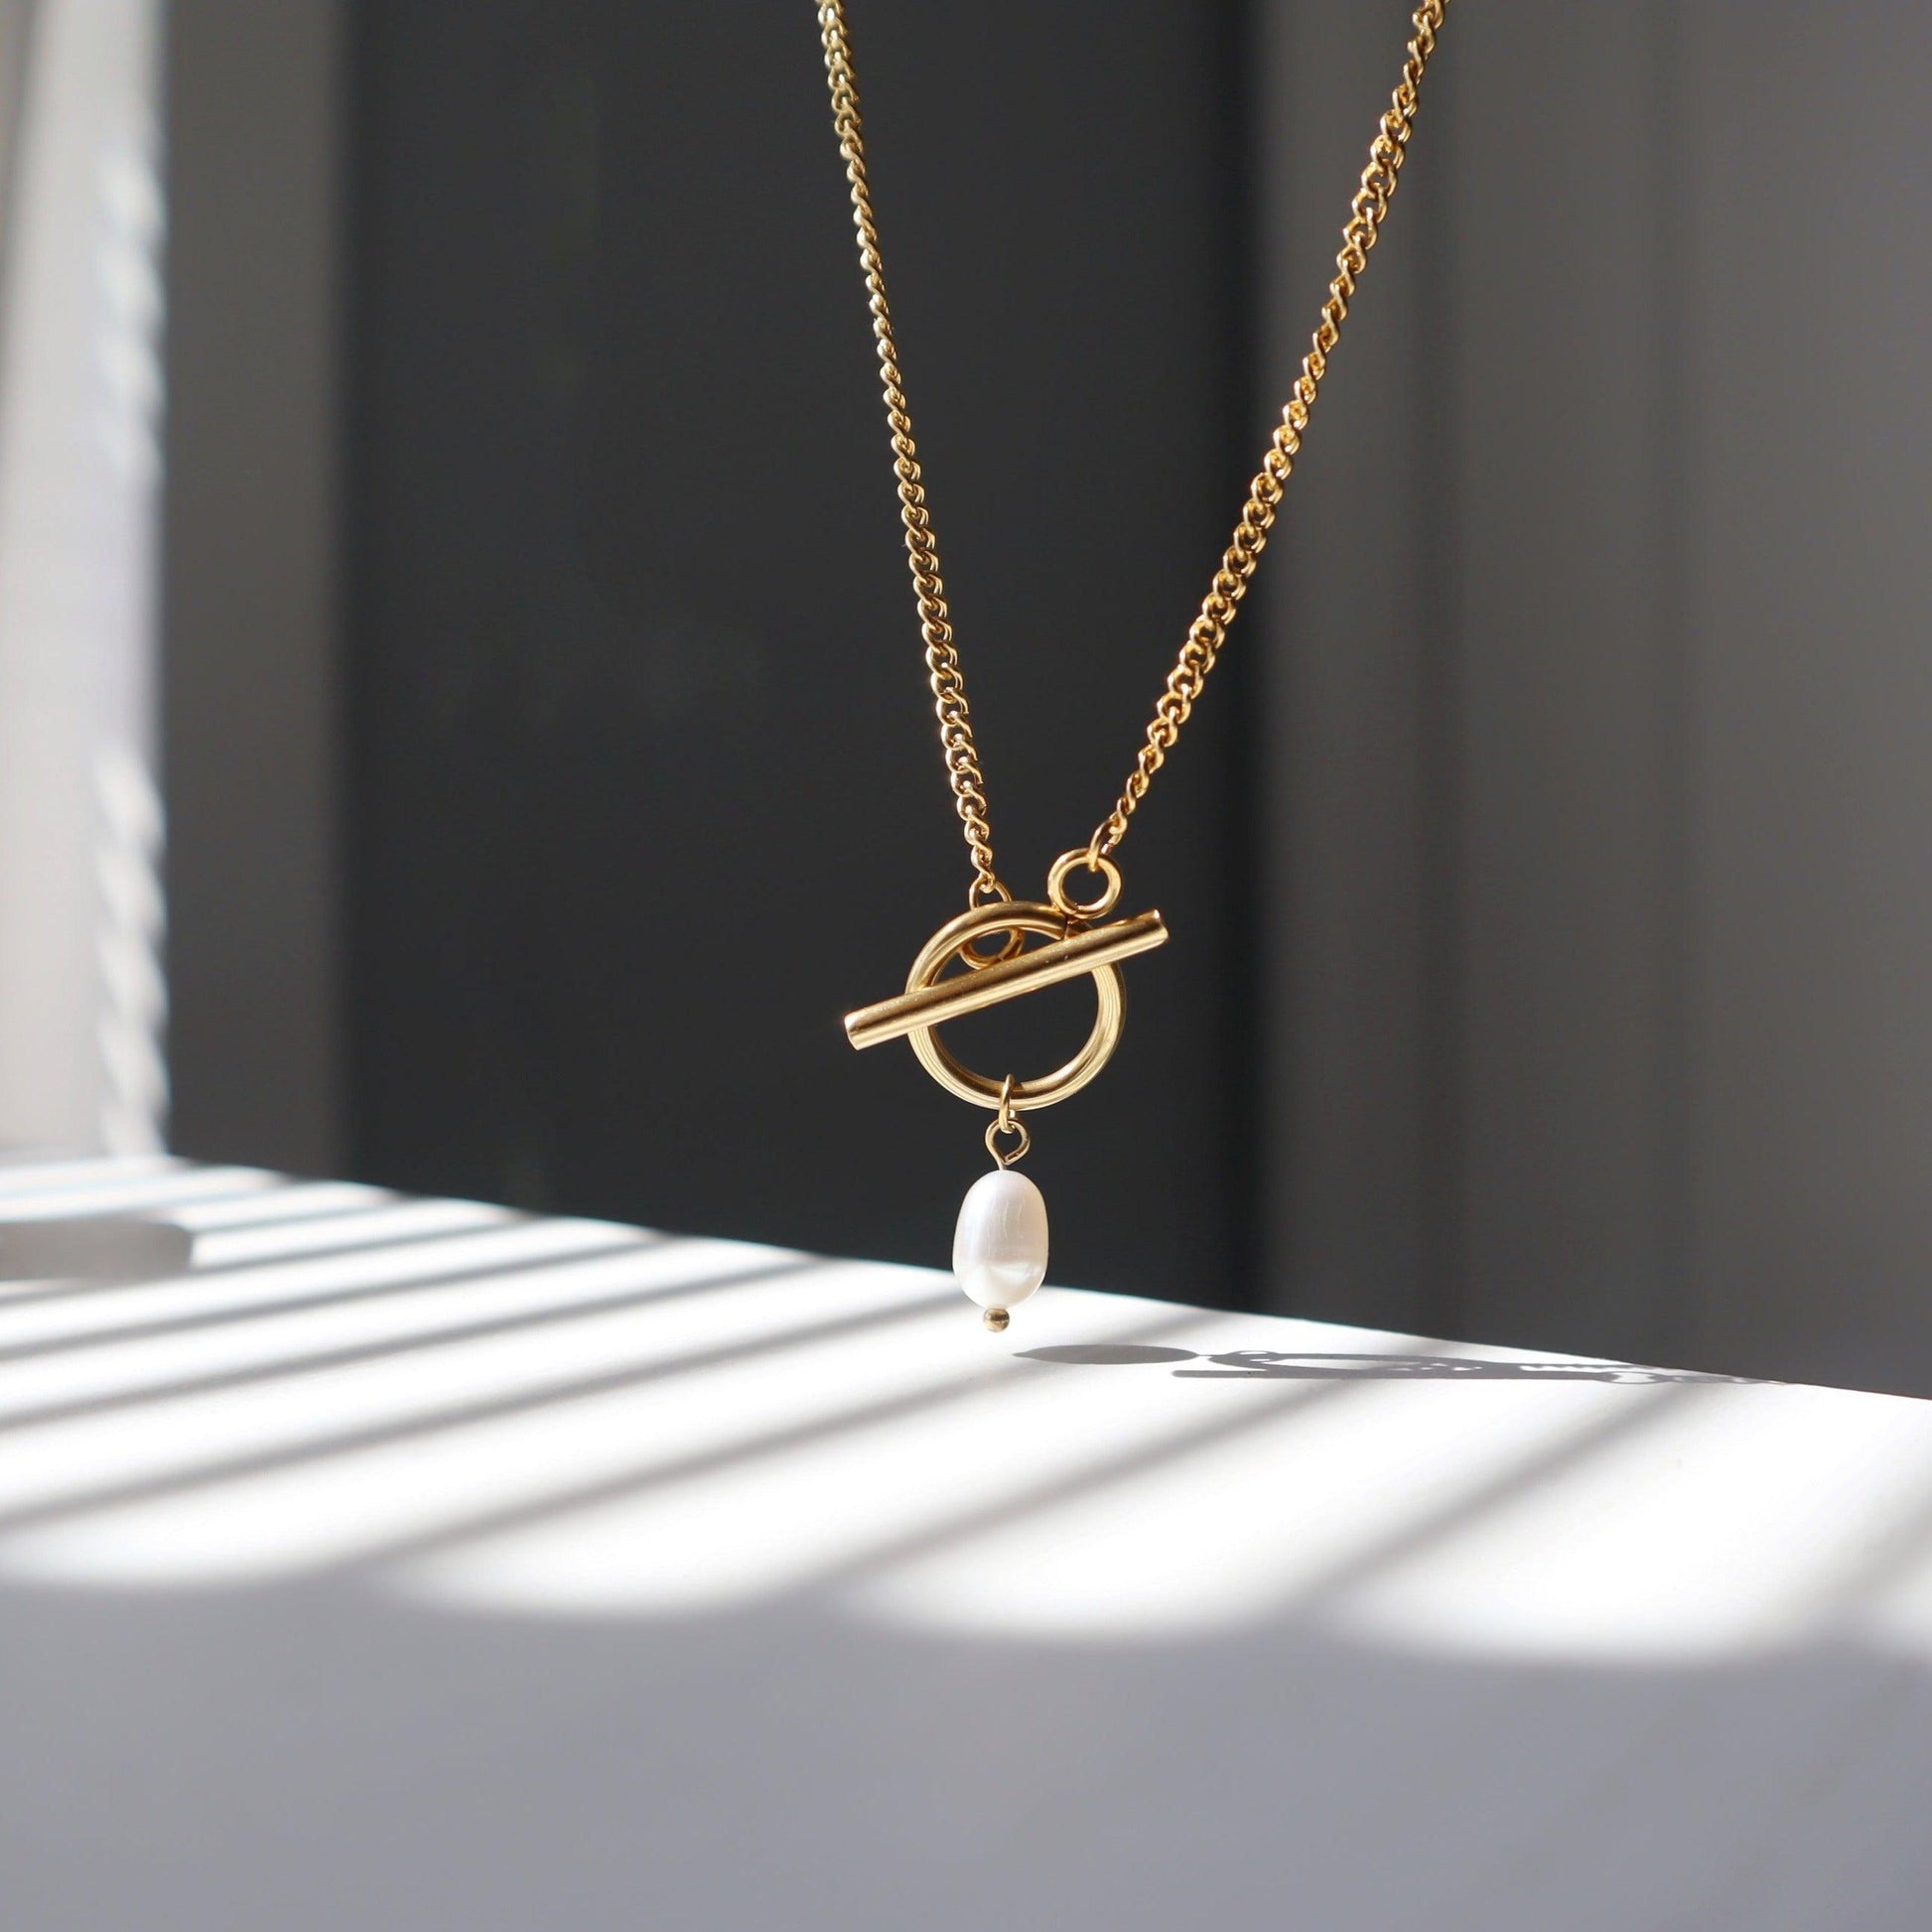 Pearl Toggle Necklace - JESSA JEWELRY | GOLD JEWELRY; dainty, affordable gold everyday jewelry. Tarnish free, water-resistant, hypoallergenic. Jewelry for everyday wear